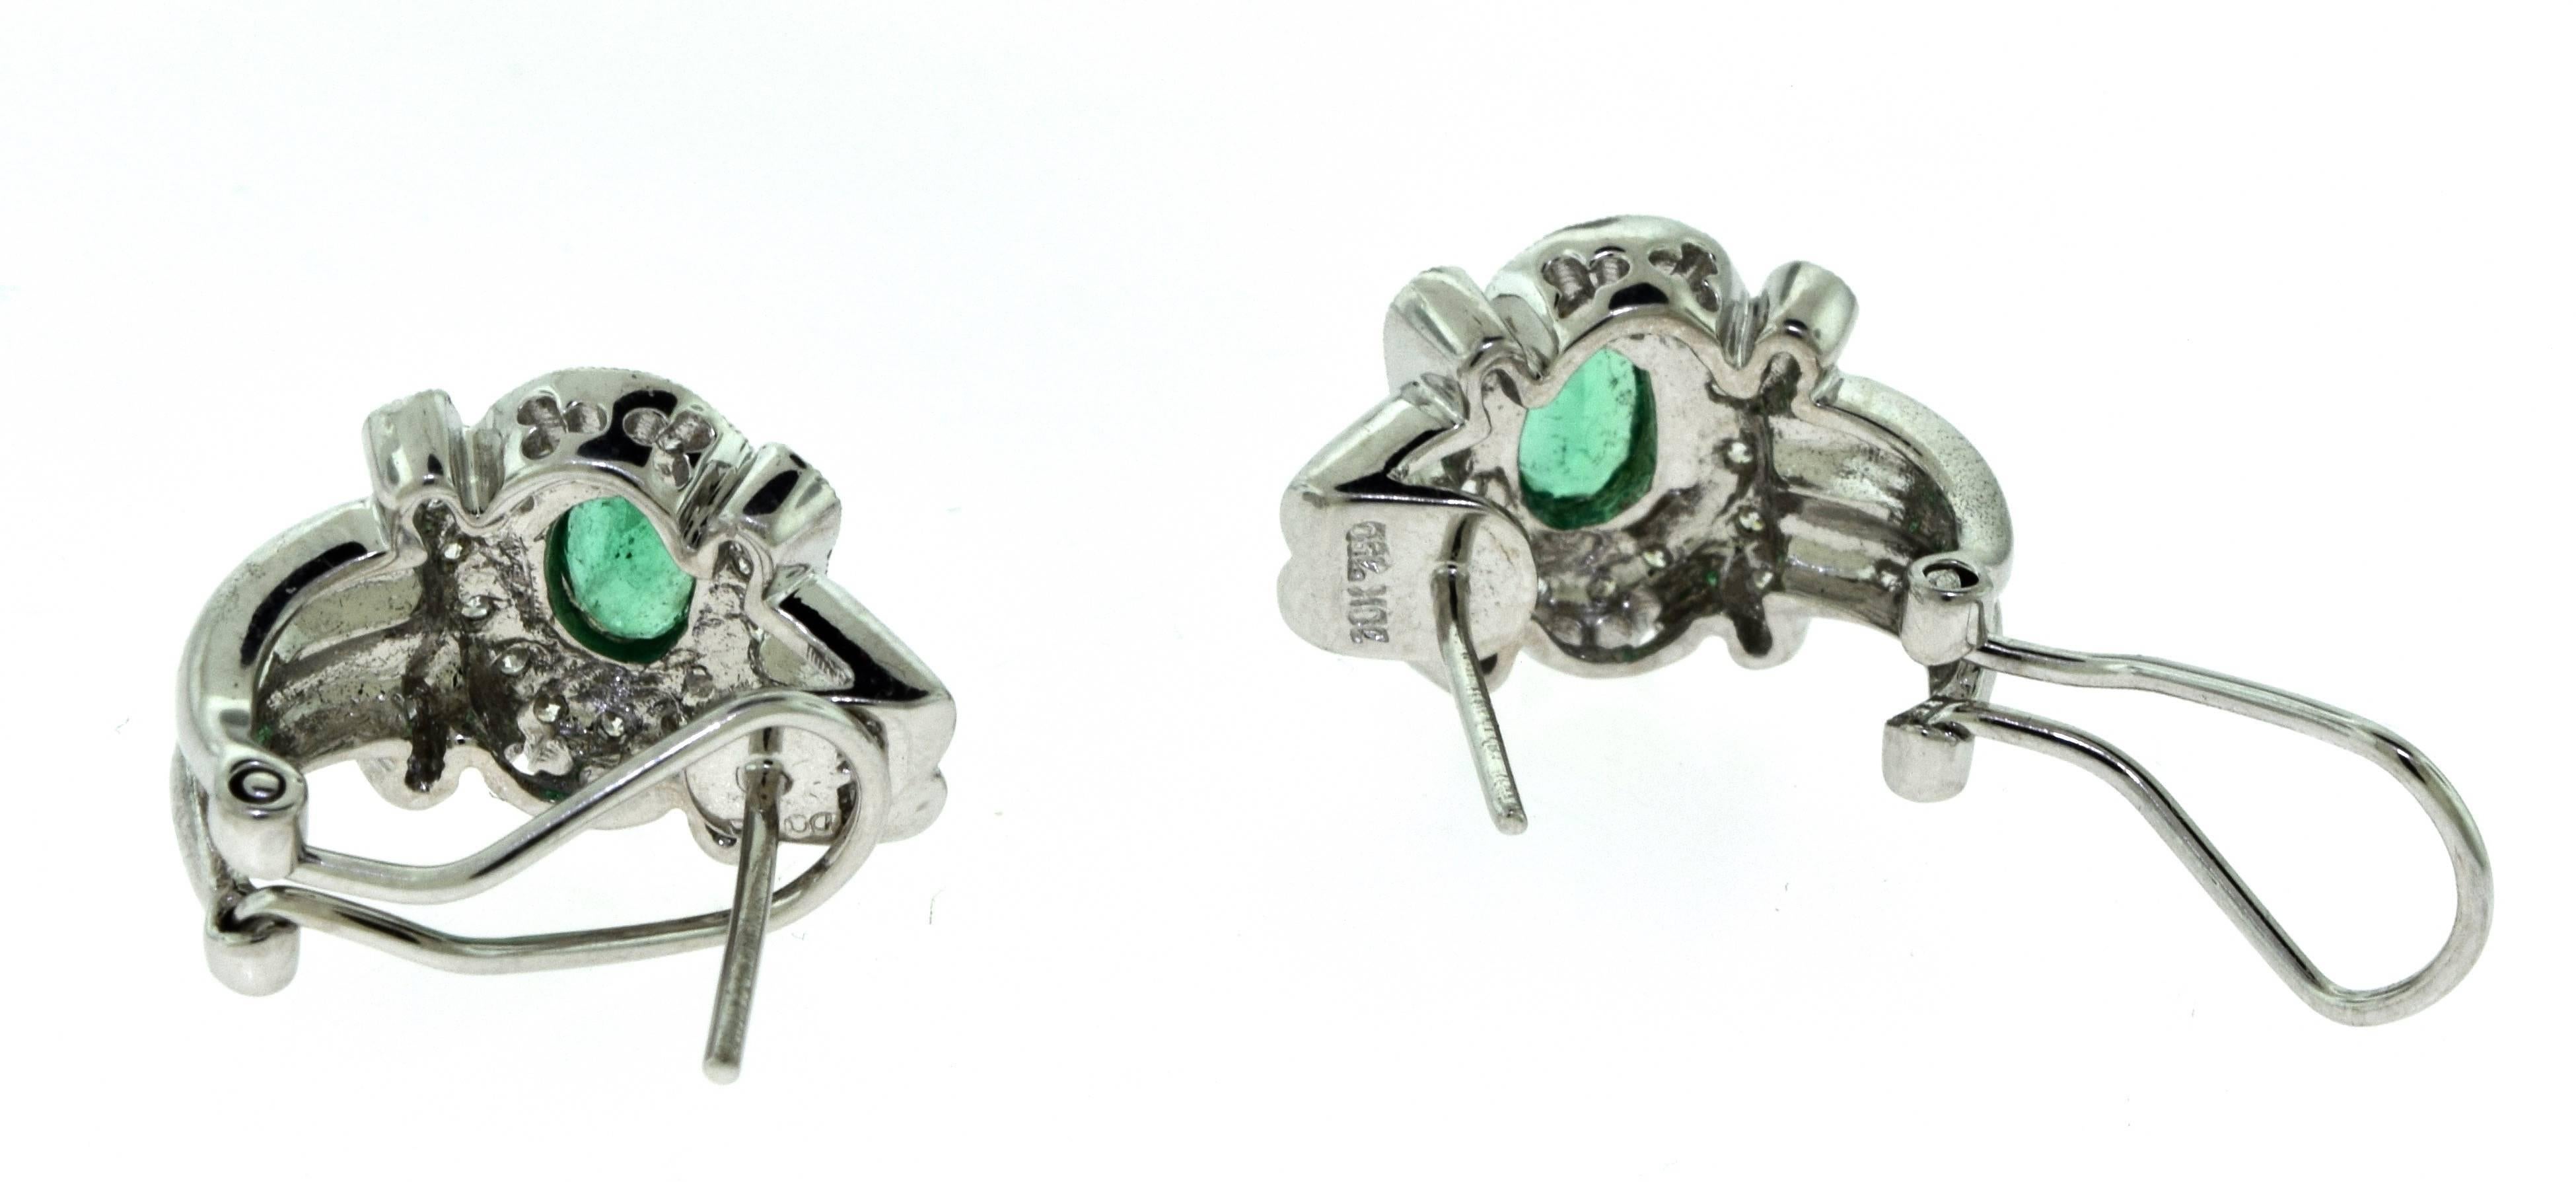 Emerald and Diamond Swirl 18 Karat White Gold Earrings In Excellent Condition For Sale In Miami, FL